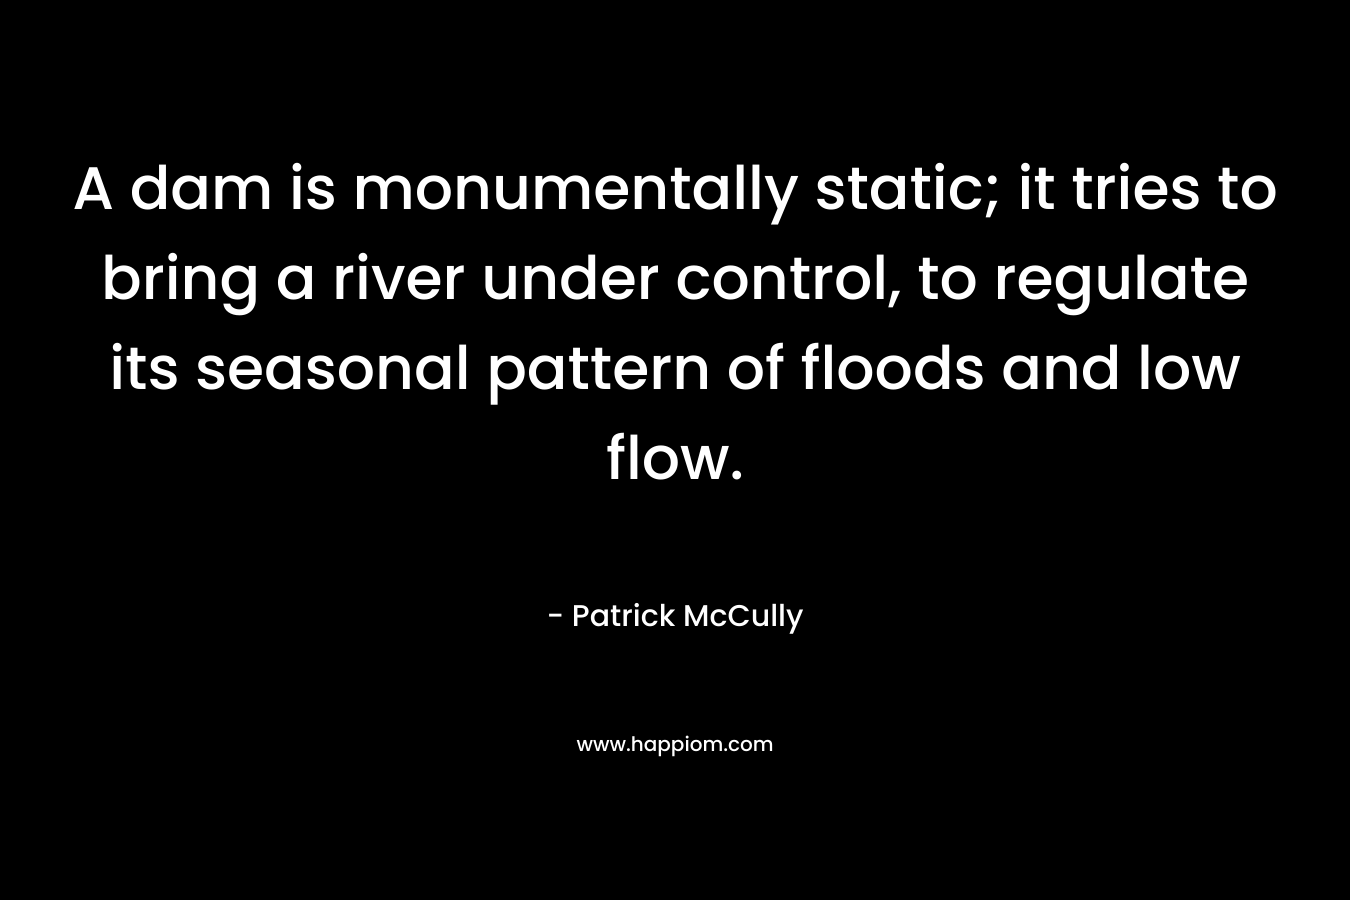 A dam is monumentally static; it tries to bring a river under control, to regulate its seasonal pattern of floods and low flow. – Patrick McCully